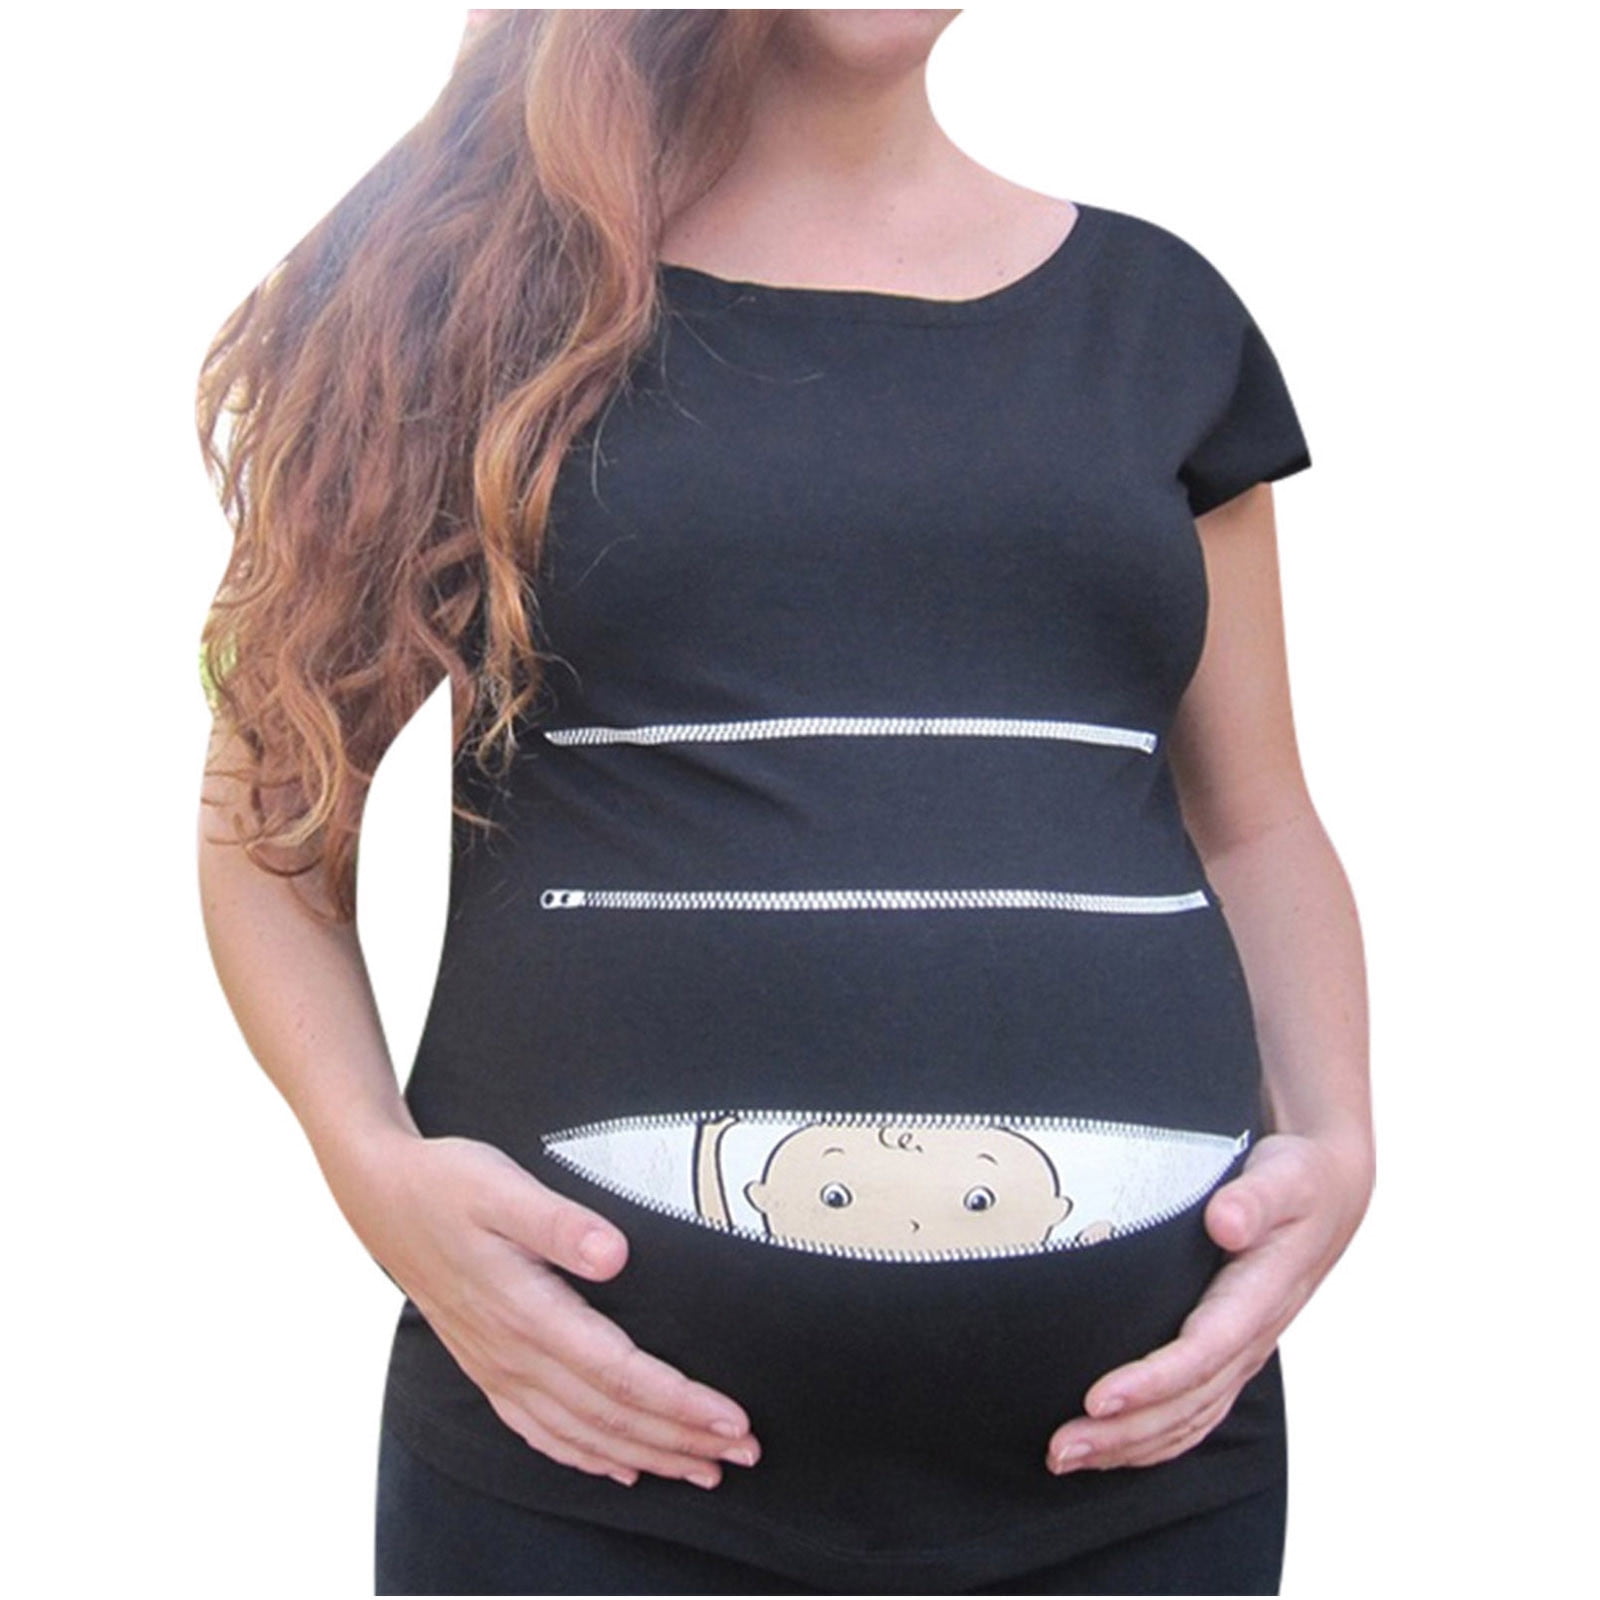 Pregnancy Style Blouse Drindf Tops Woman T-Shirt,Stripe Baby Ruched Side Top 